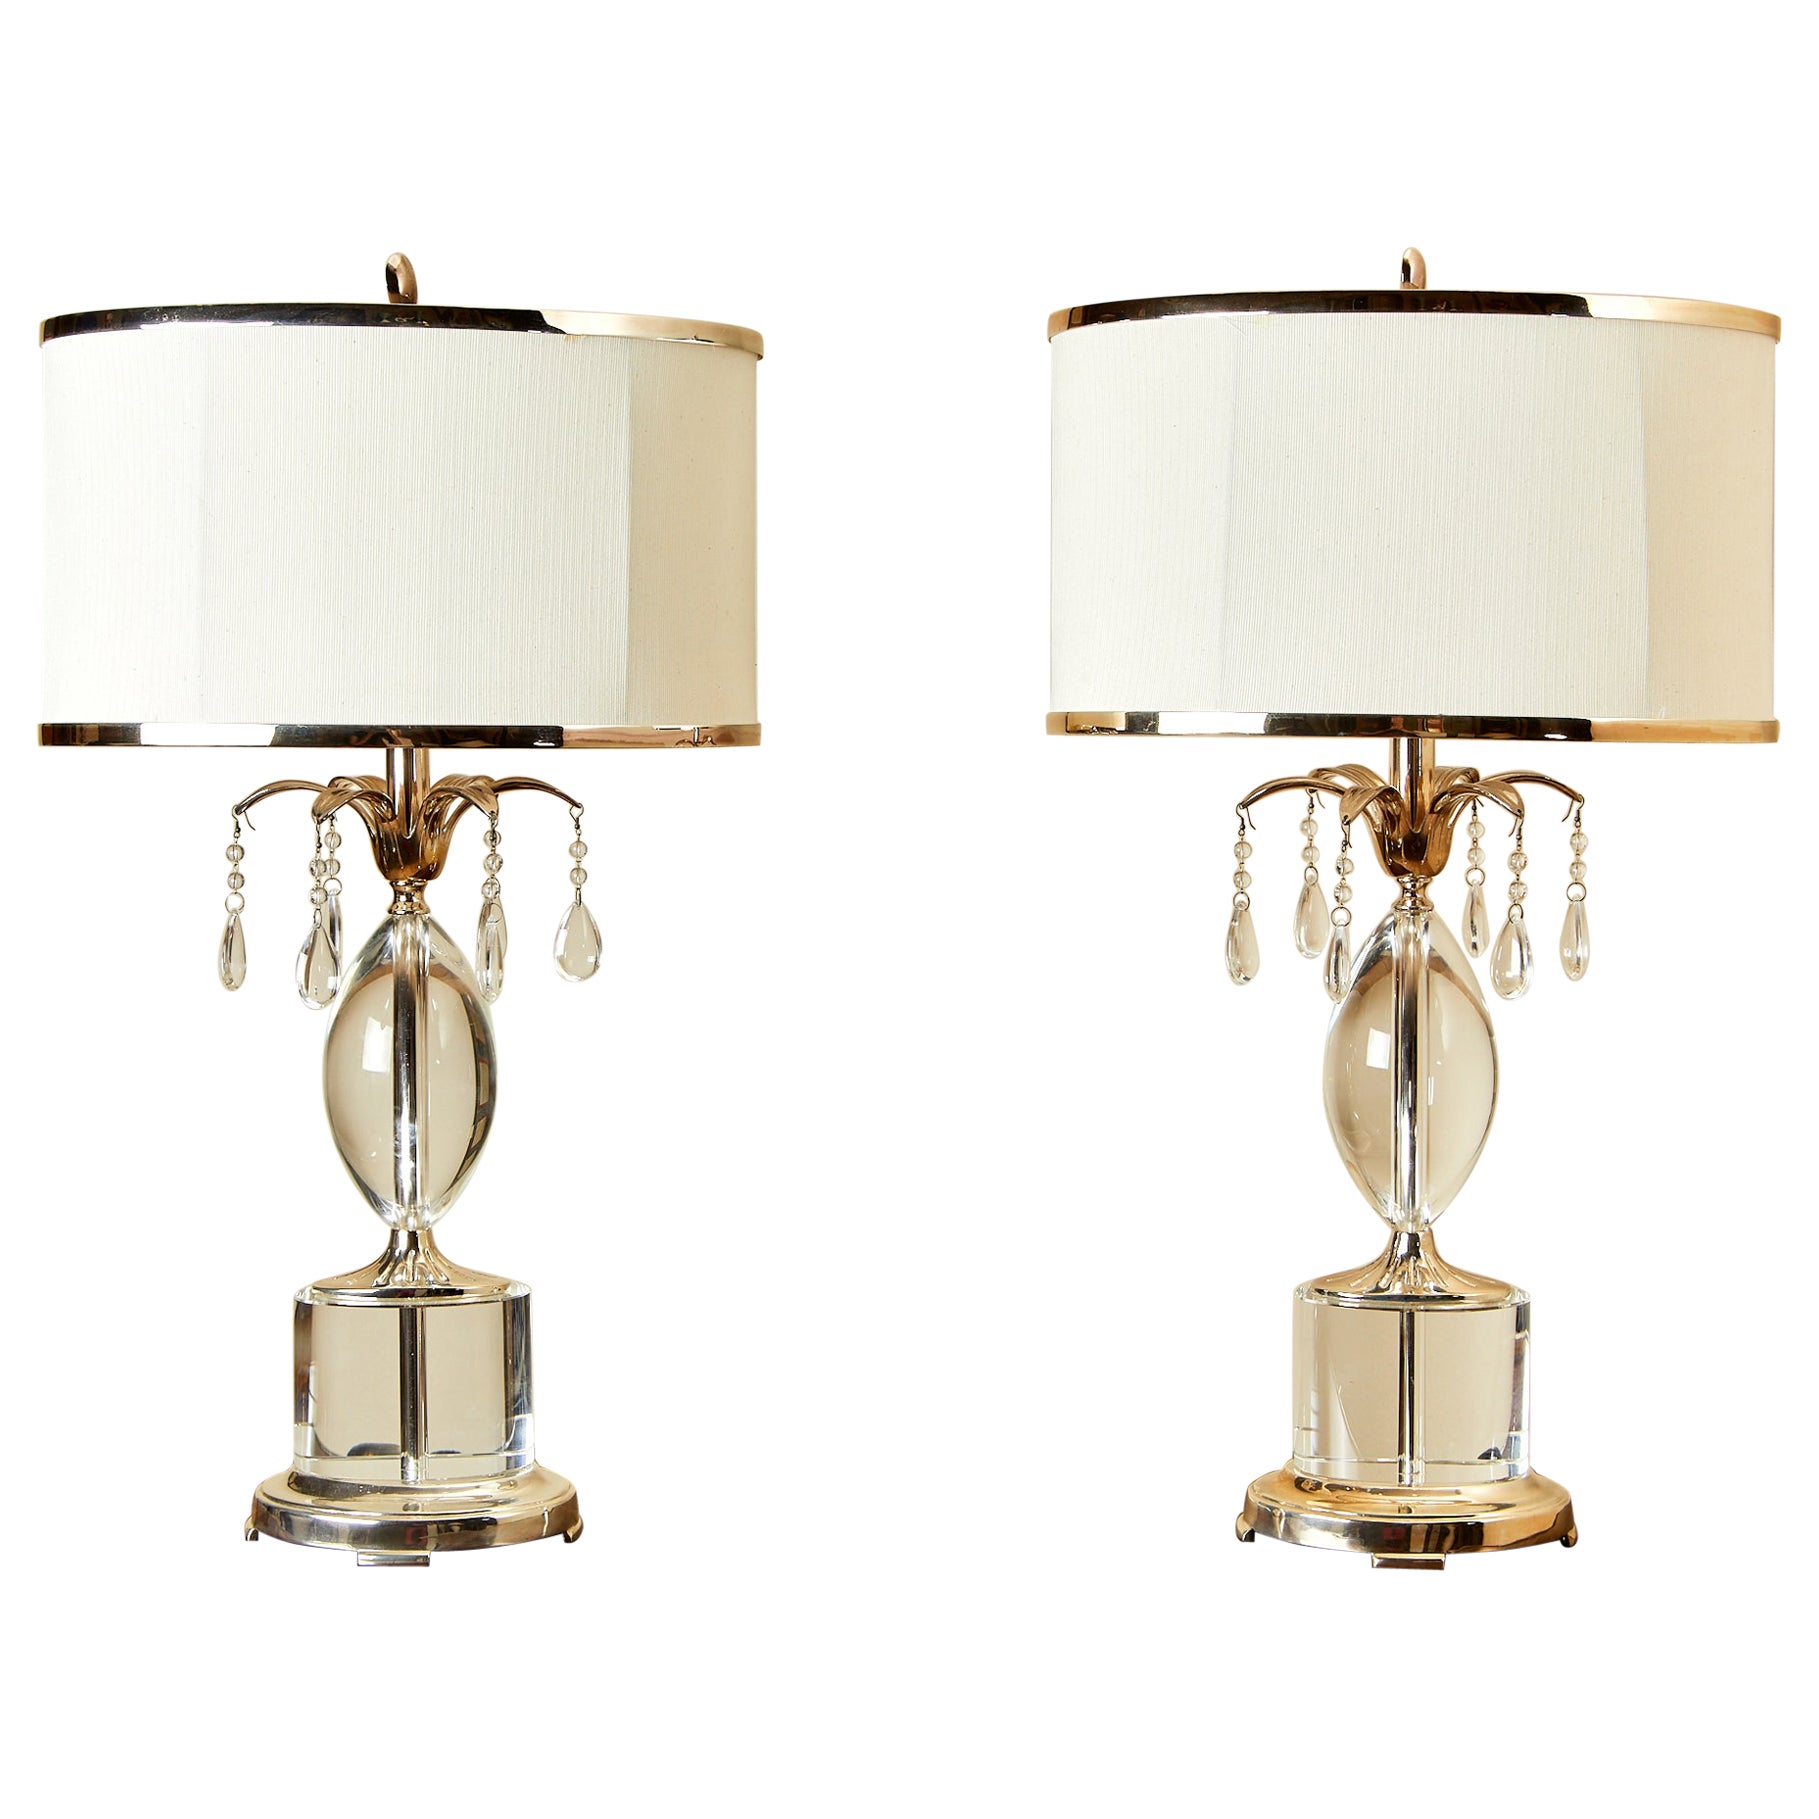 John Richard, pair of lamps with altuglass and silvered brass pendants. For Sale